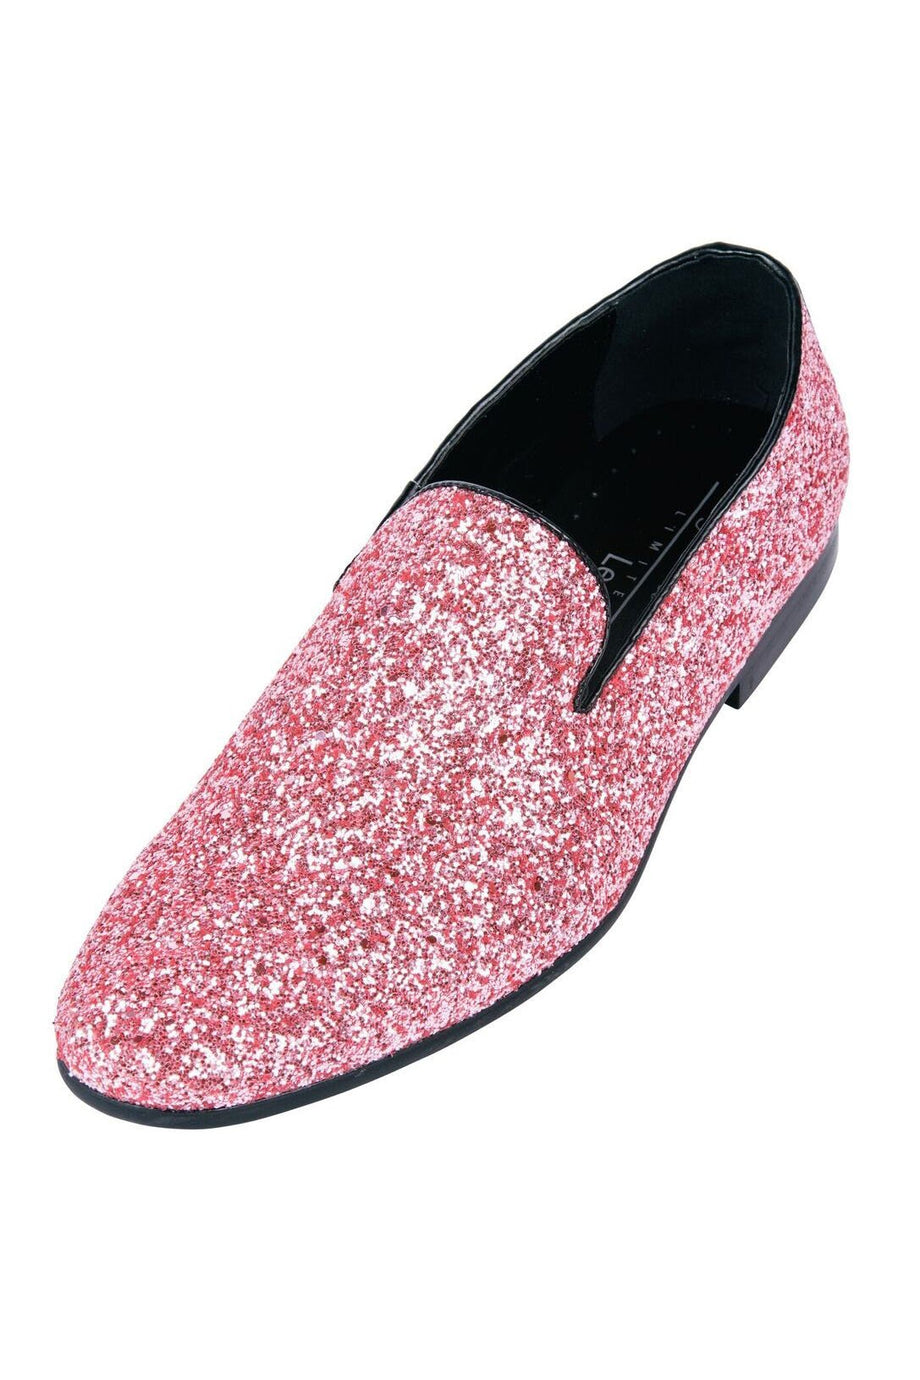 Frederico Leone "Sparkle" Pink Shoes